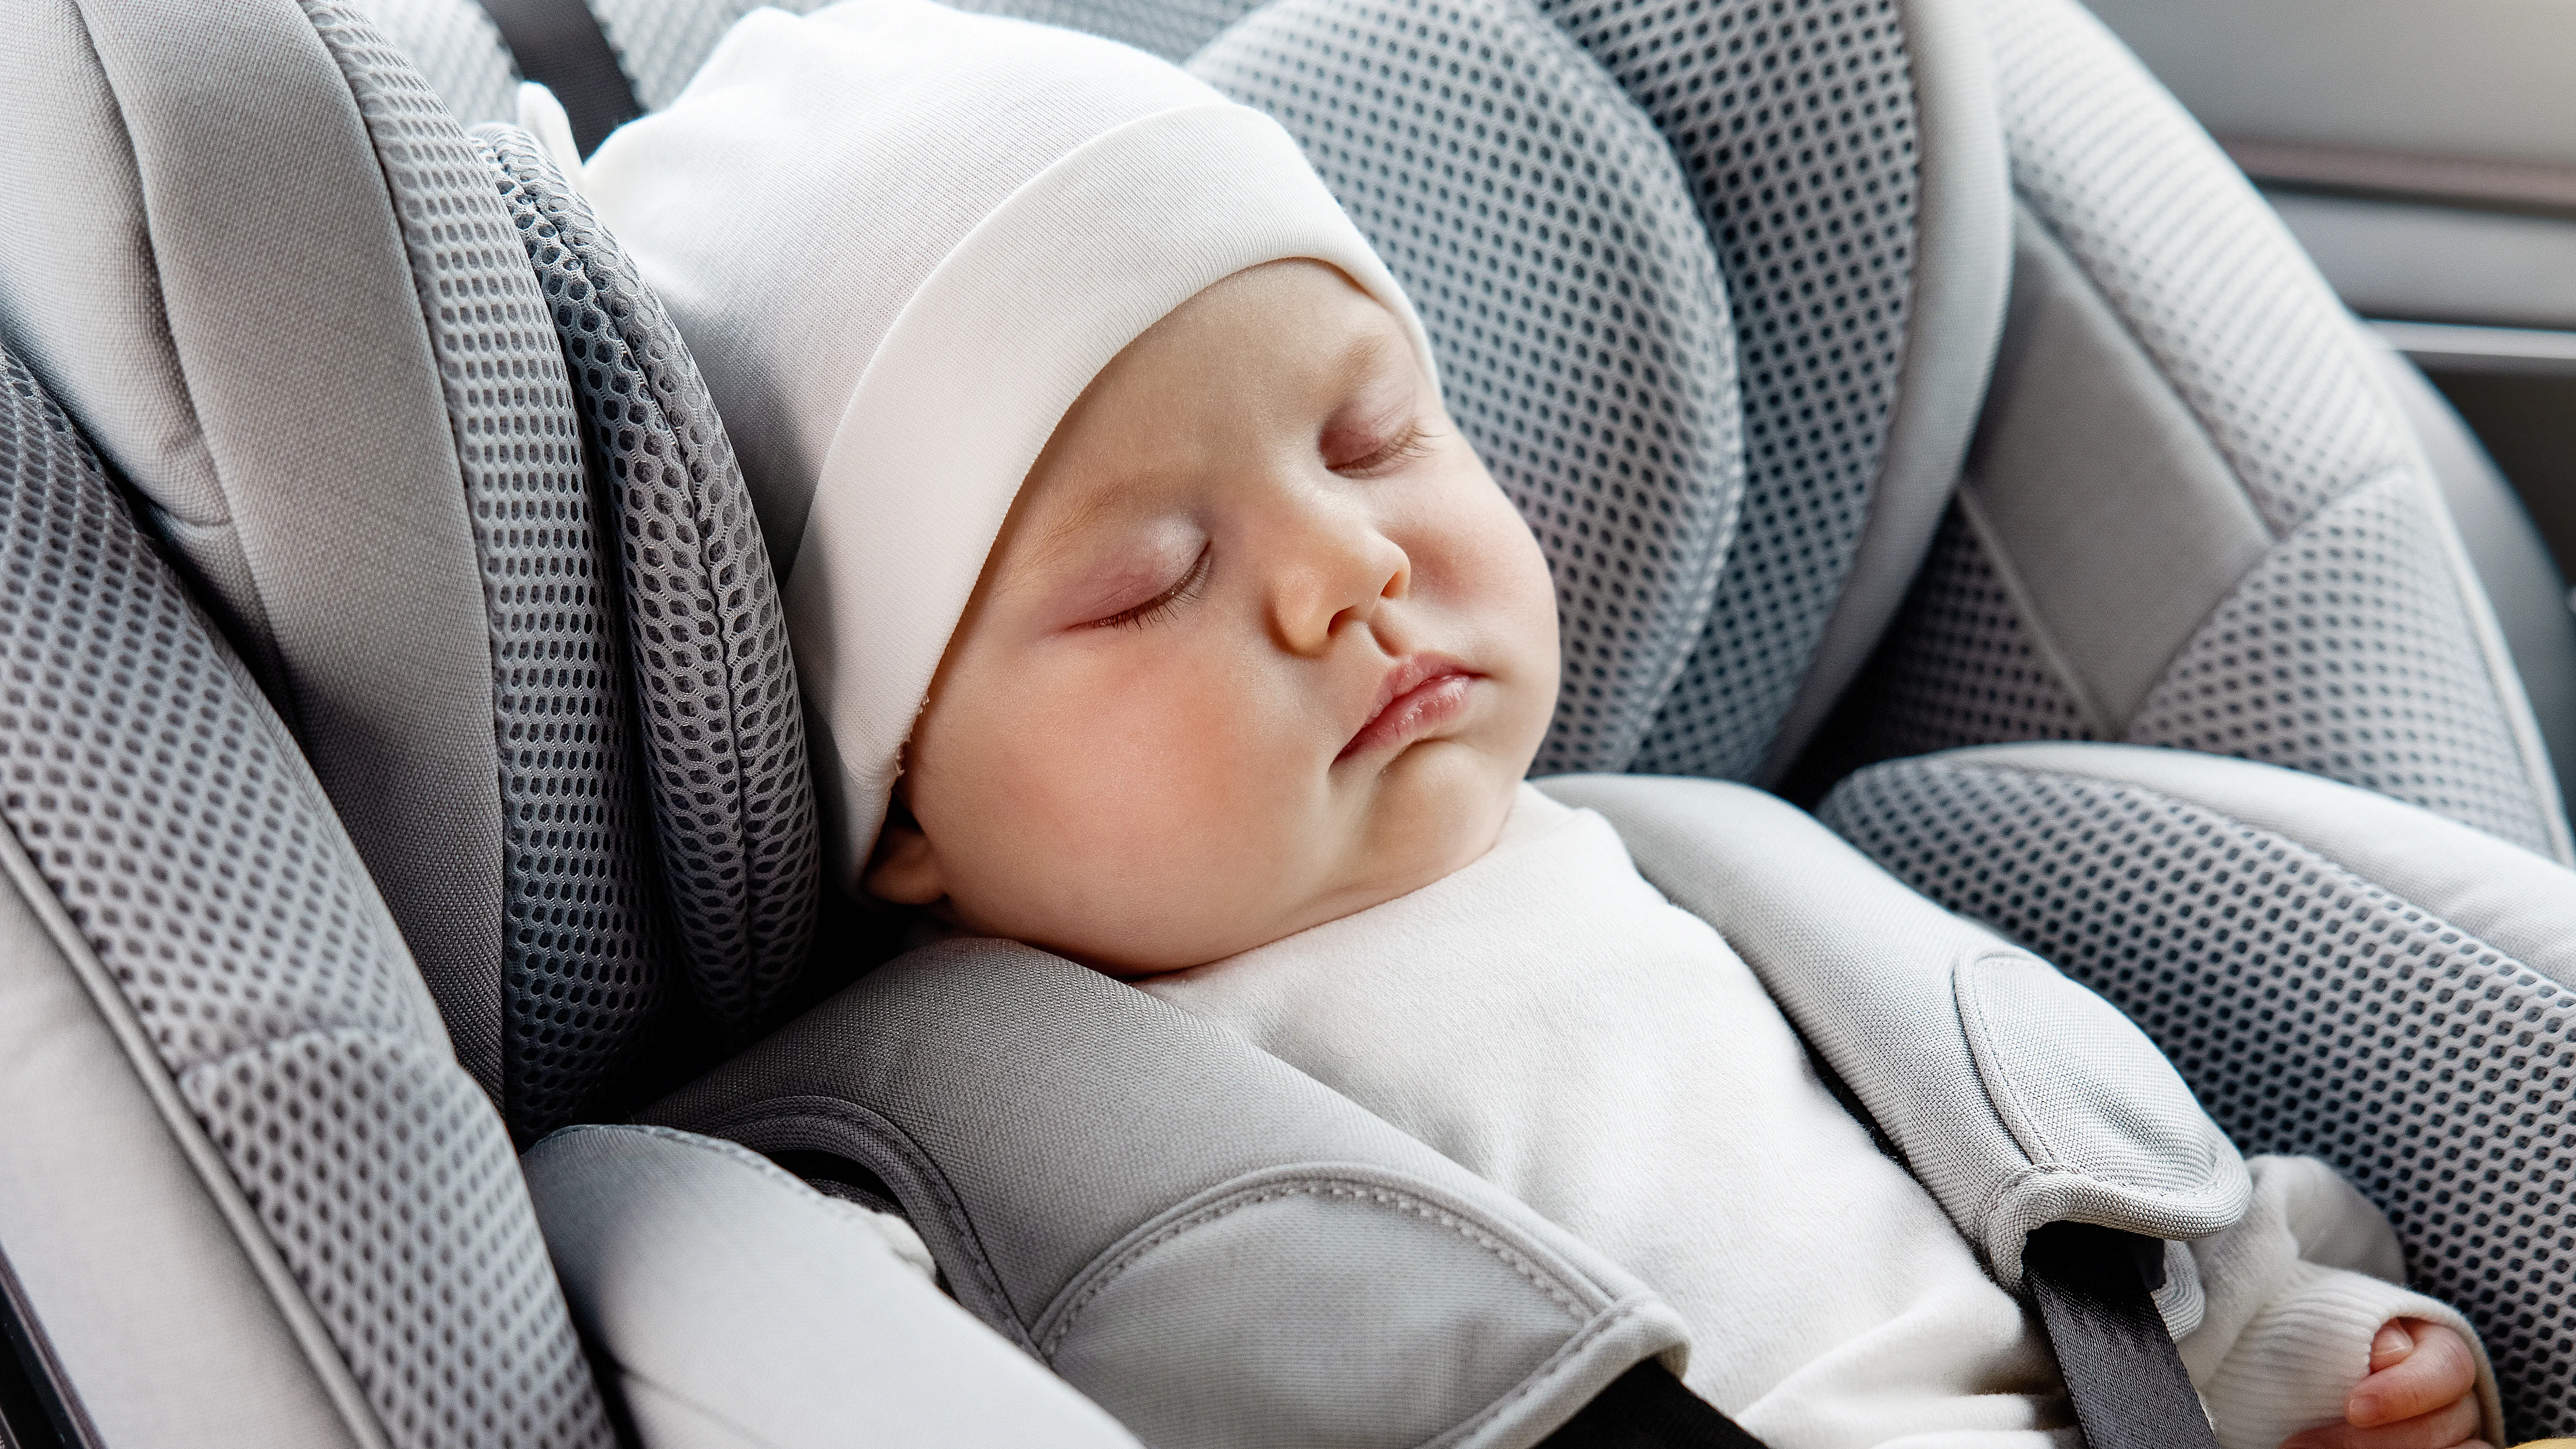 How to prepare for driving home from the maternity ward